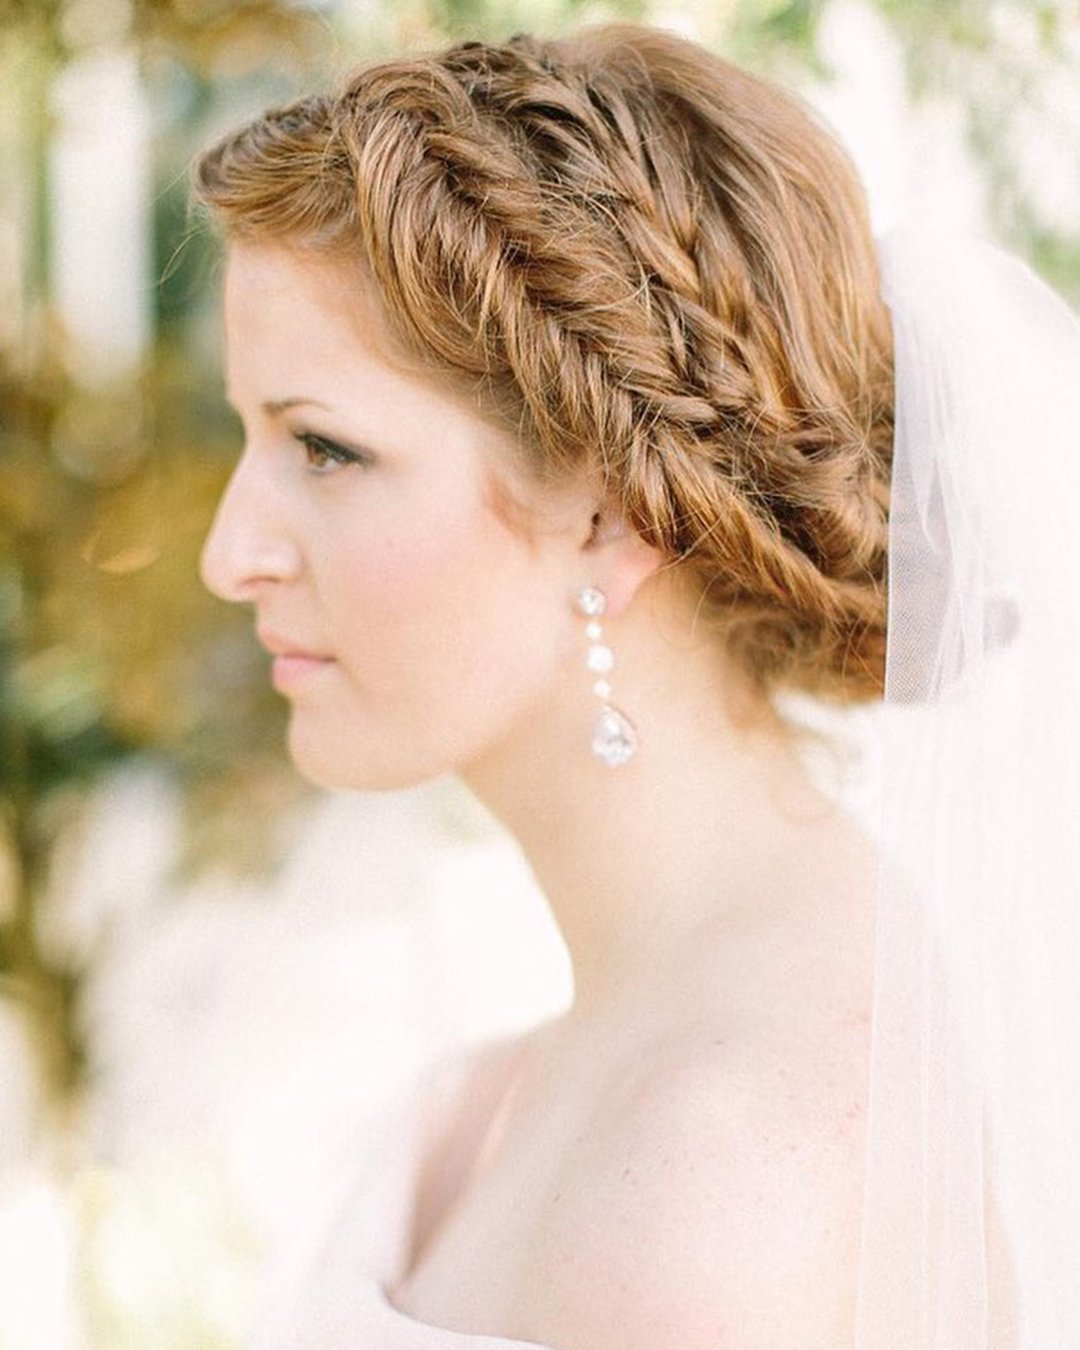 wedding hairstyles with veil braided updo for rustic bride haircomesthebride